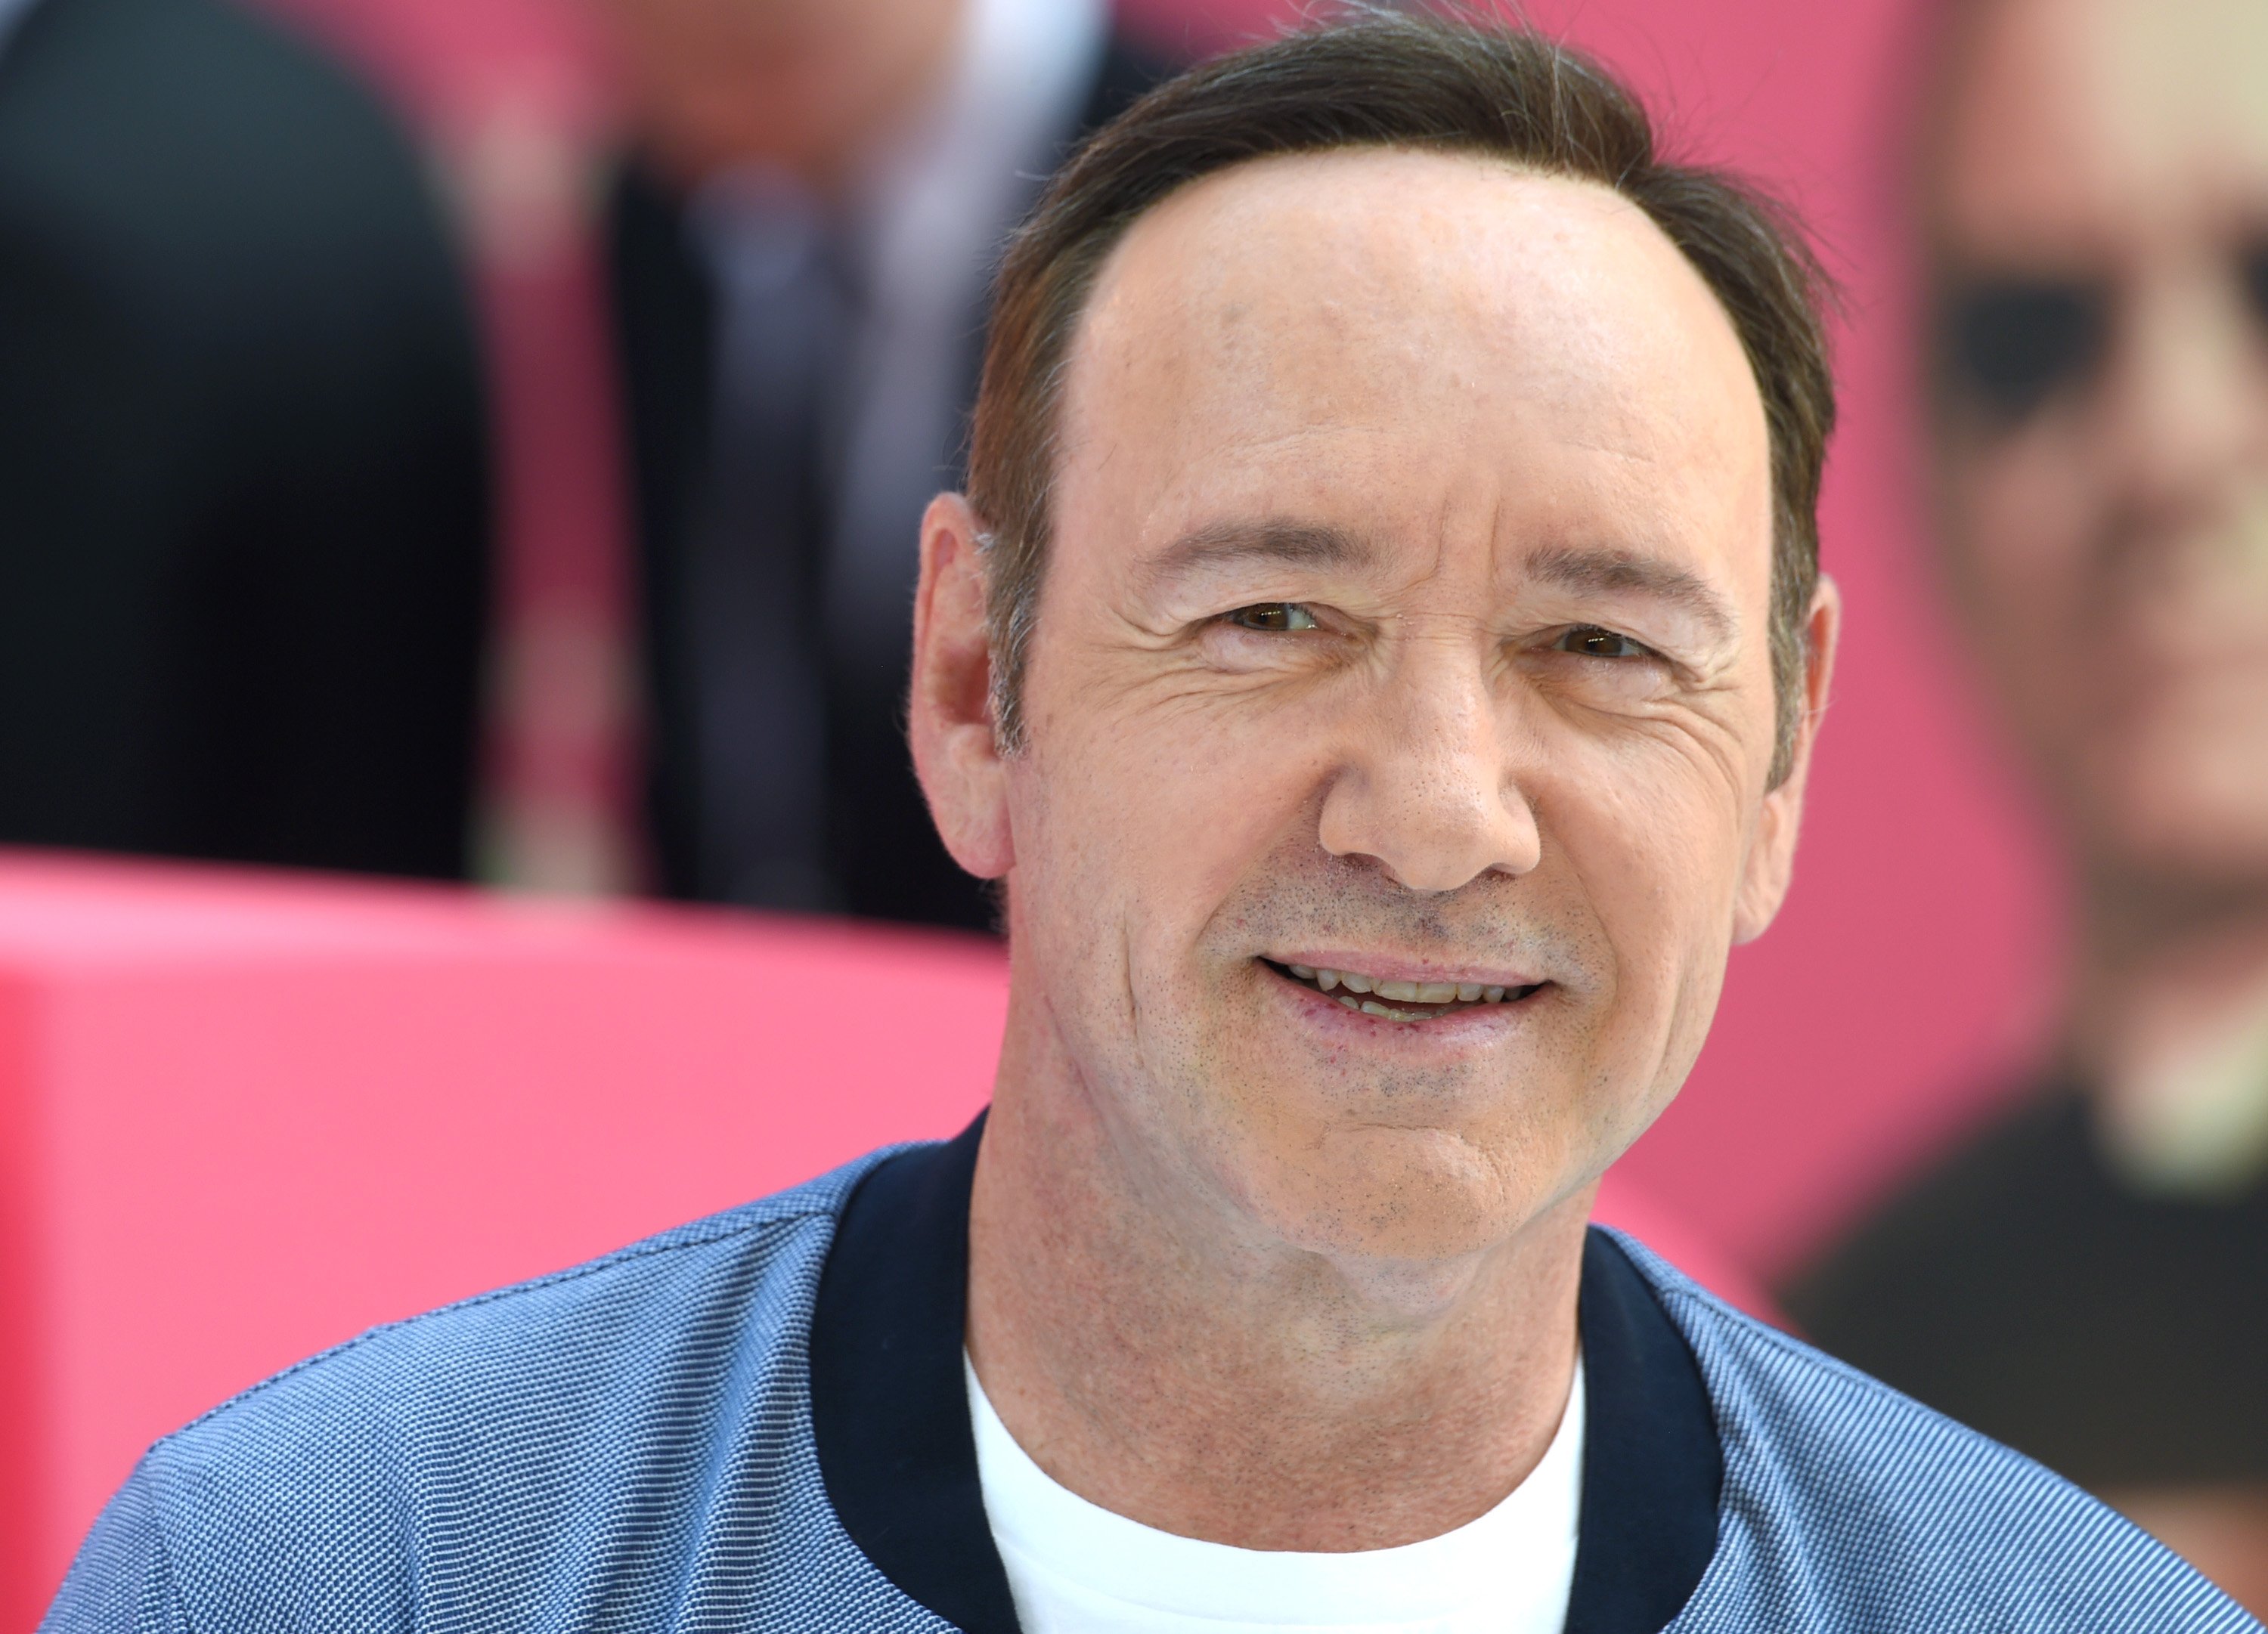 Kevin Spacey attends the European premiere of "Baby Driver" on June 21, 2017 in London, United Kingdom. | Source: Getty Images